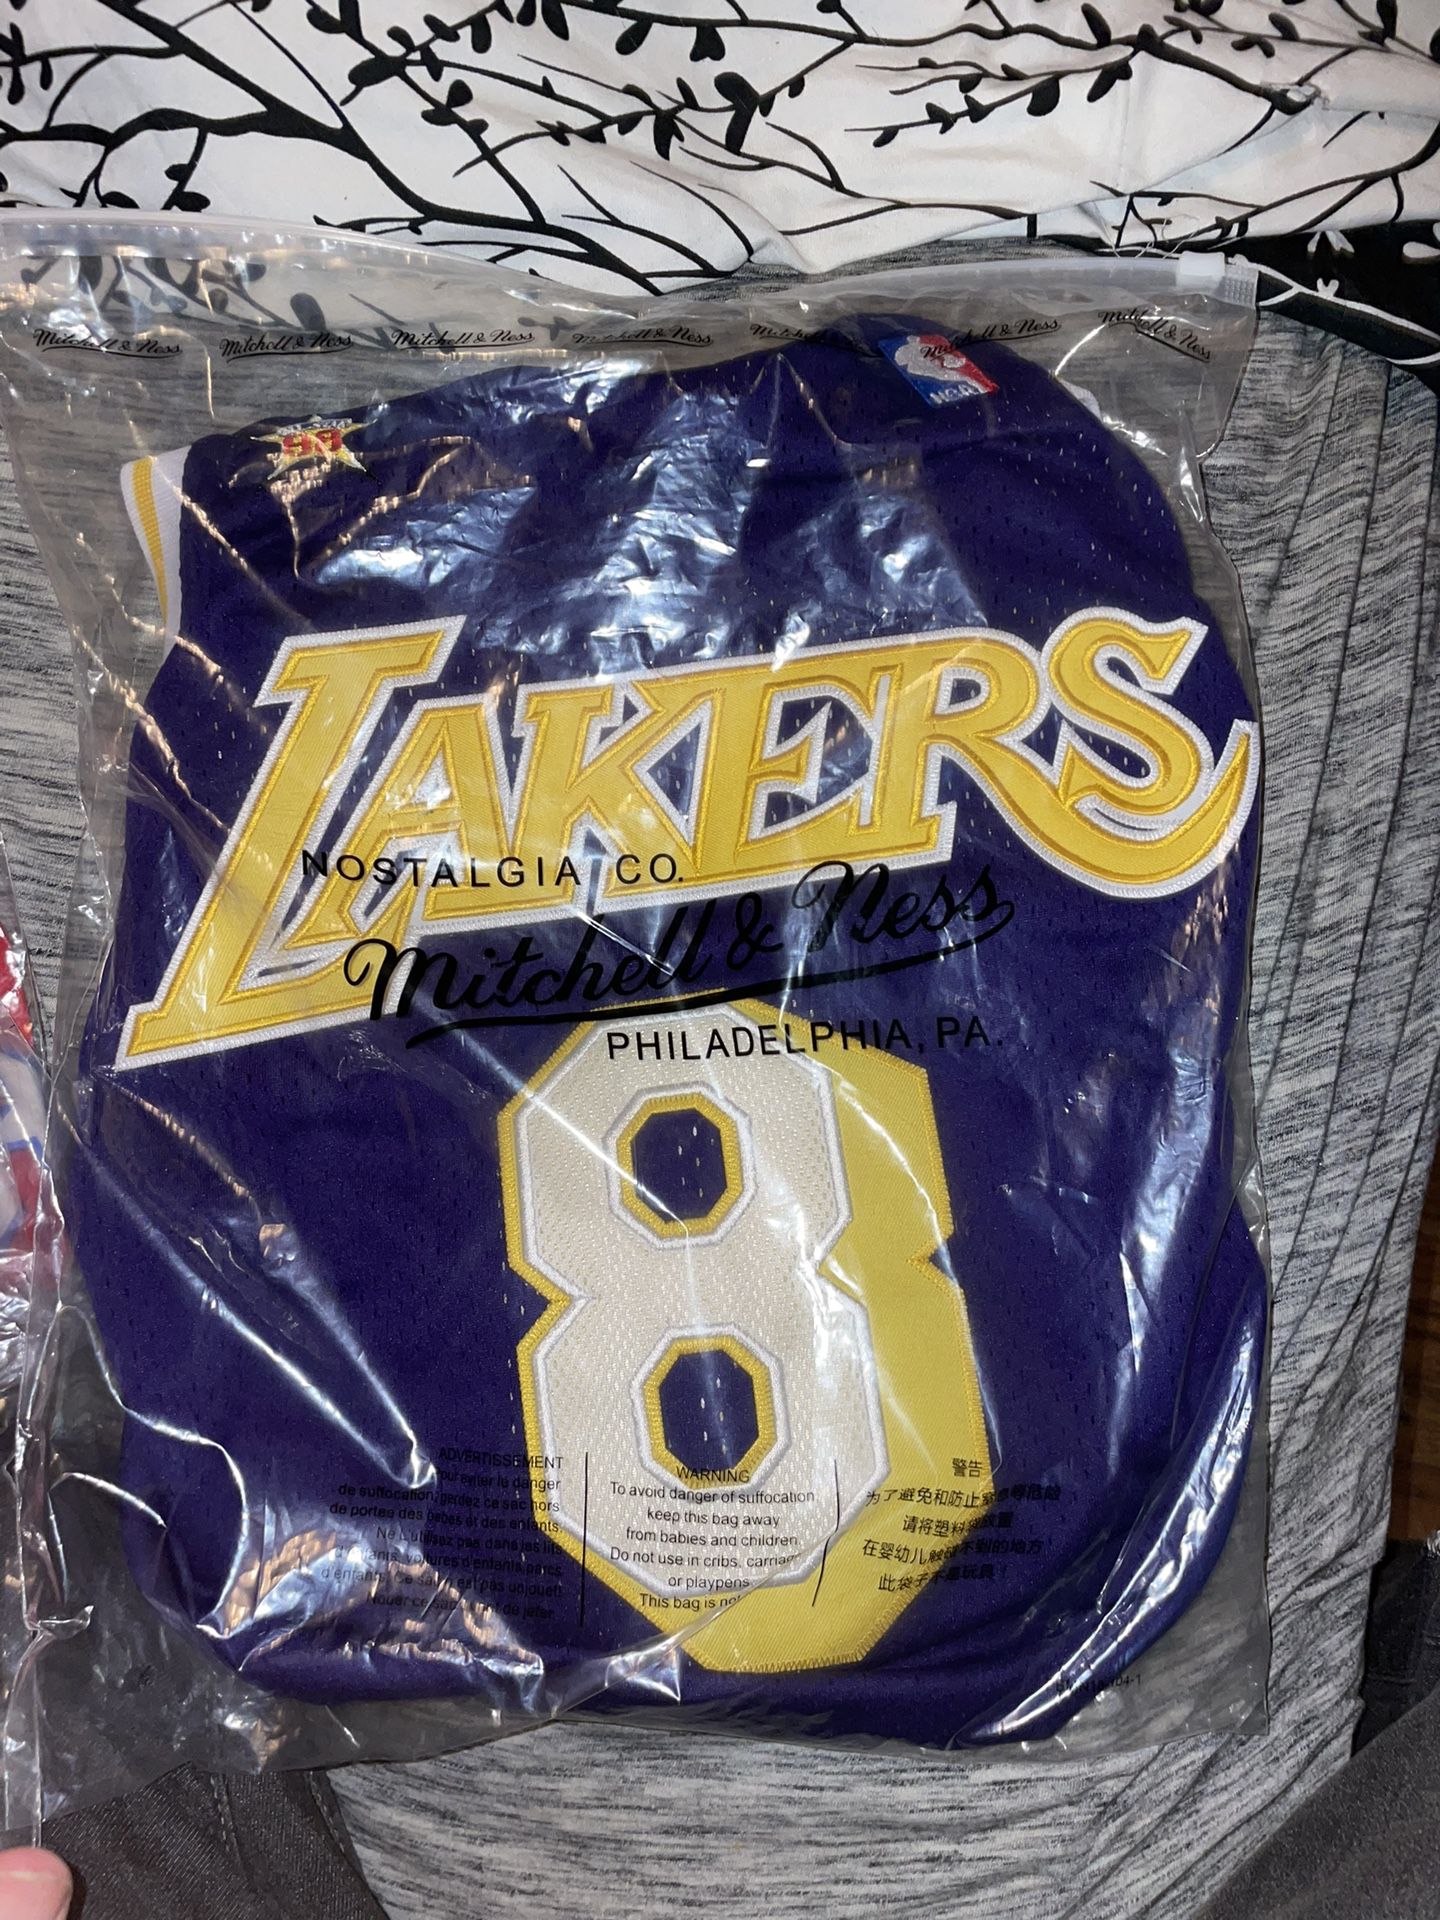 1998 Kobe Bryant All Star Jersey Size L for Sale in Creve Coeur, IL -  OfferUp